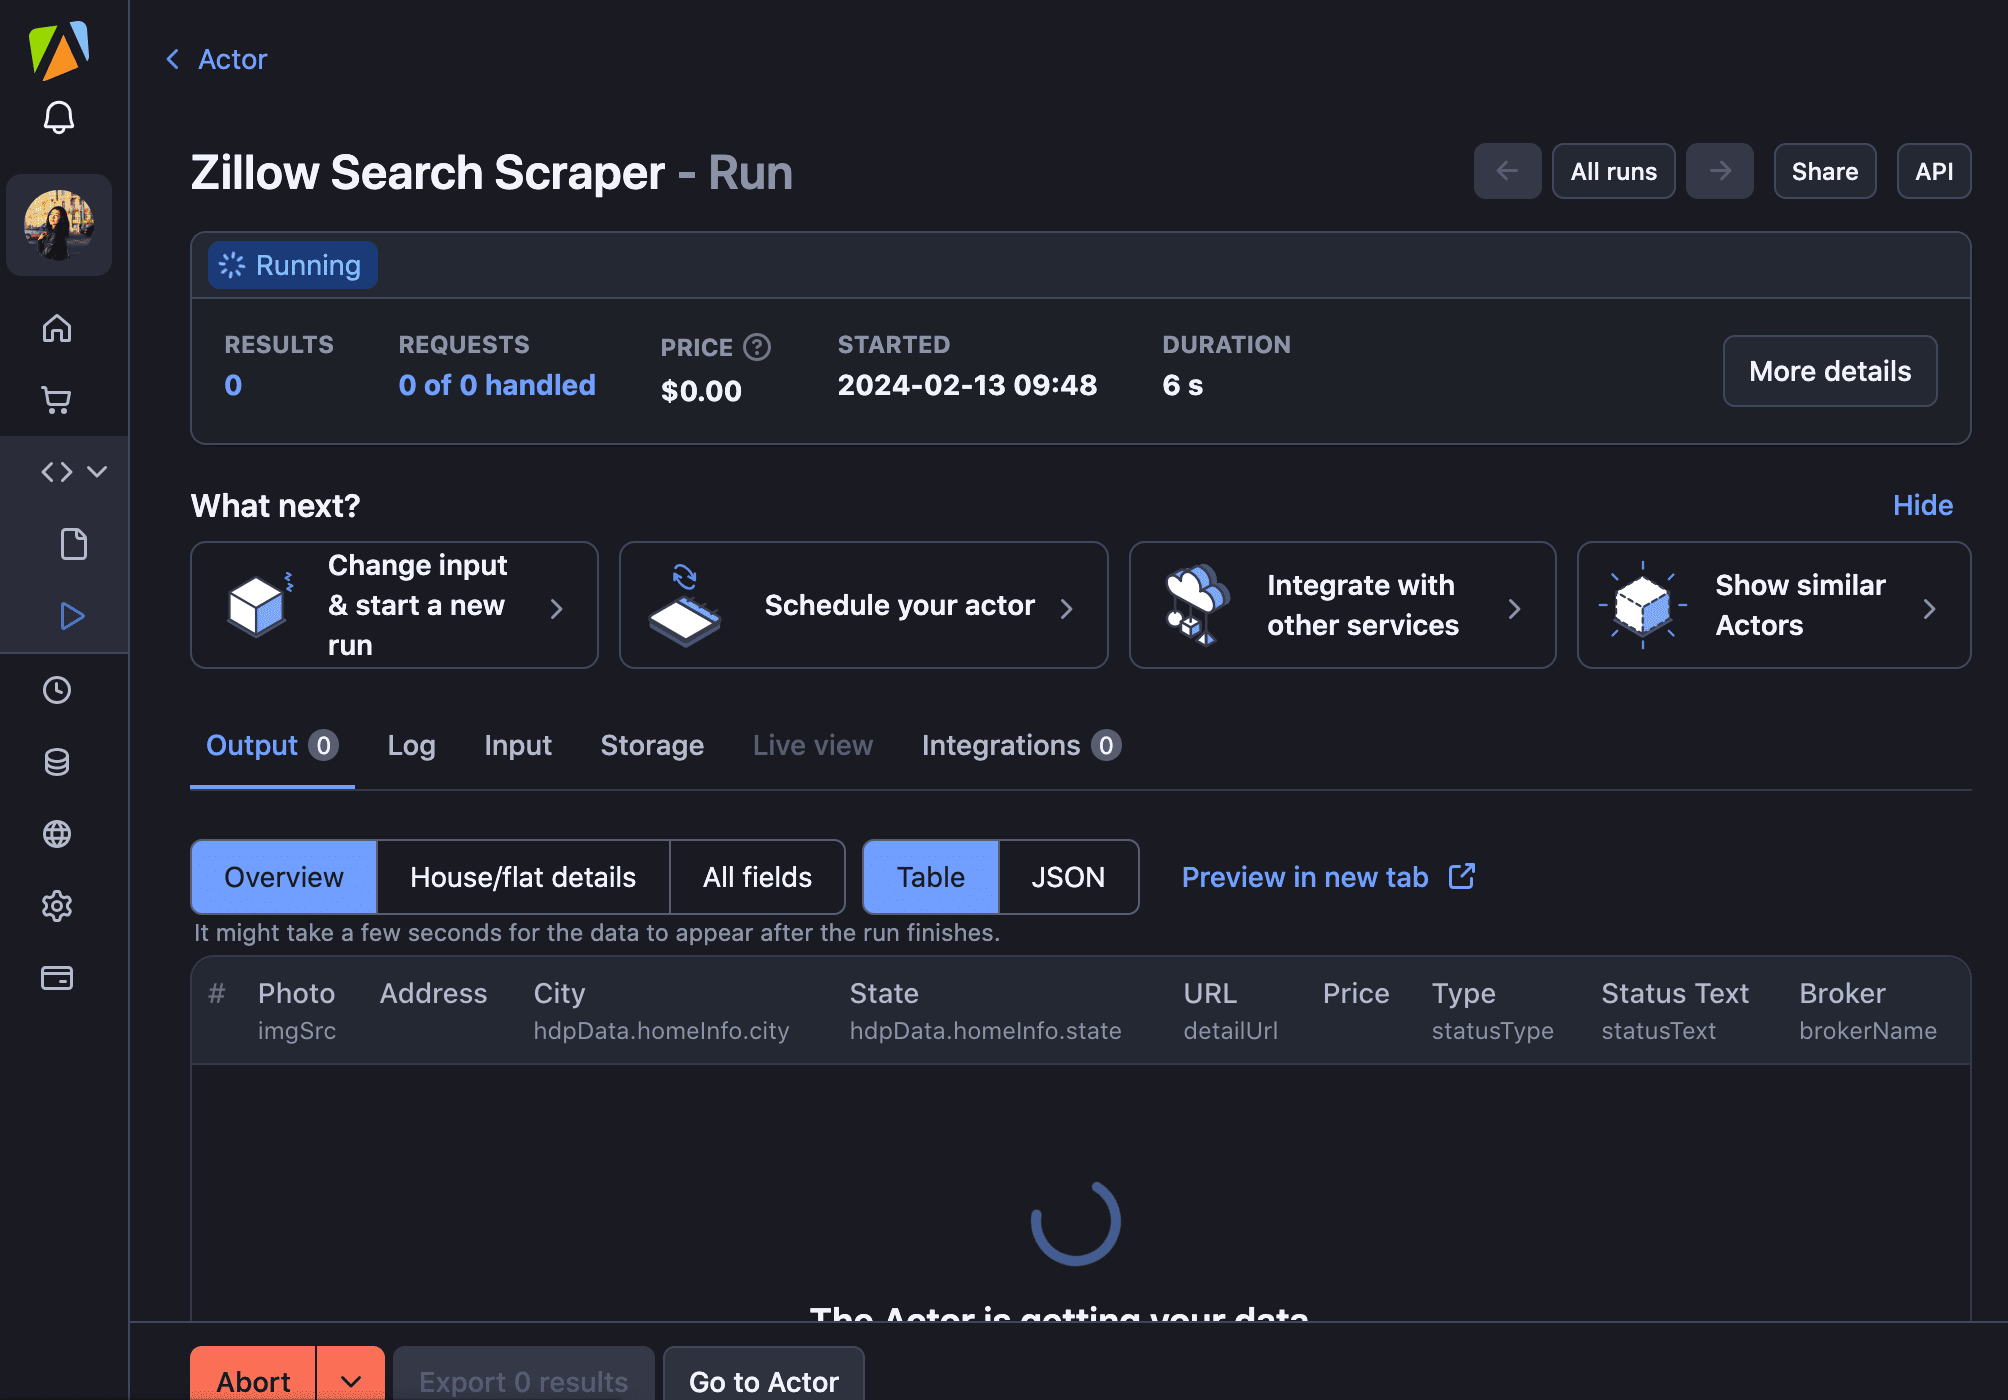 You can monitor your scraper and watch the process in the Apify console. Check logs for updates or issues.